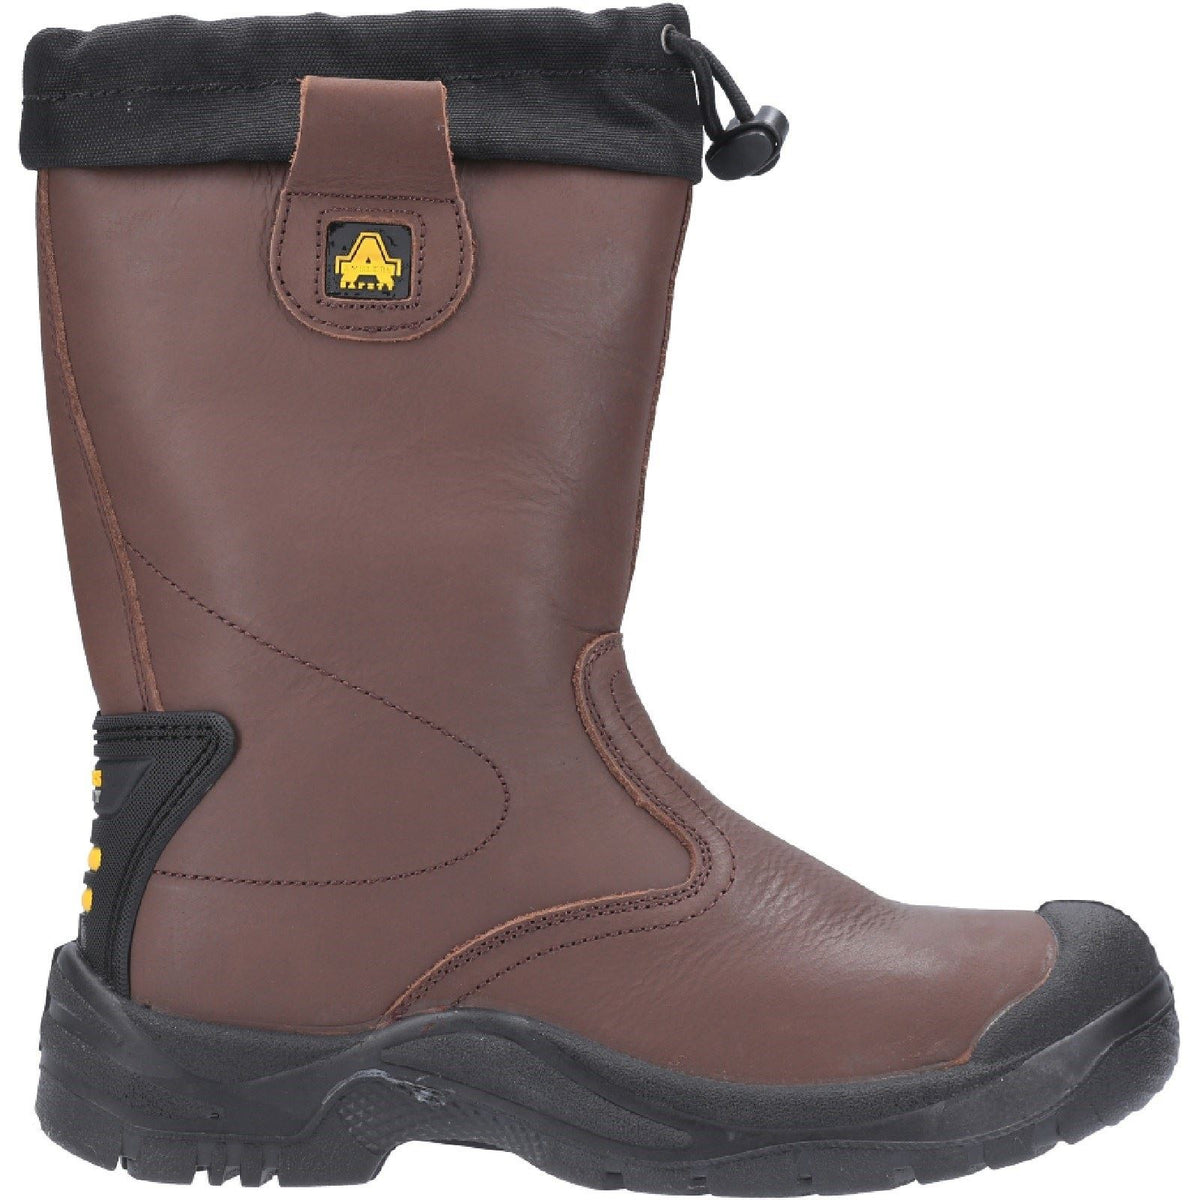 Amblers Safety FS245 Antistatic Pull On Safety Rigger Boots